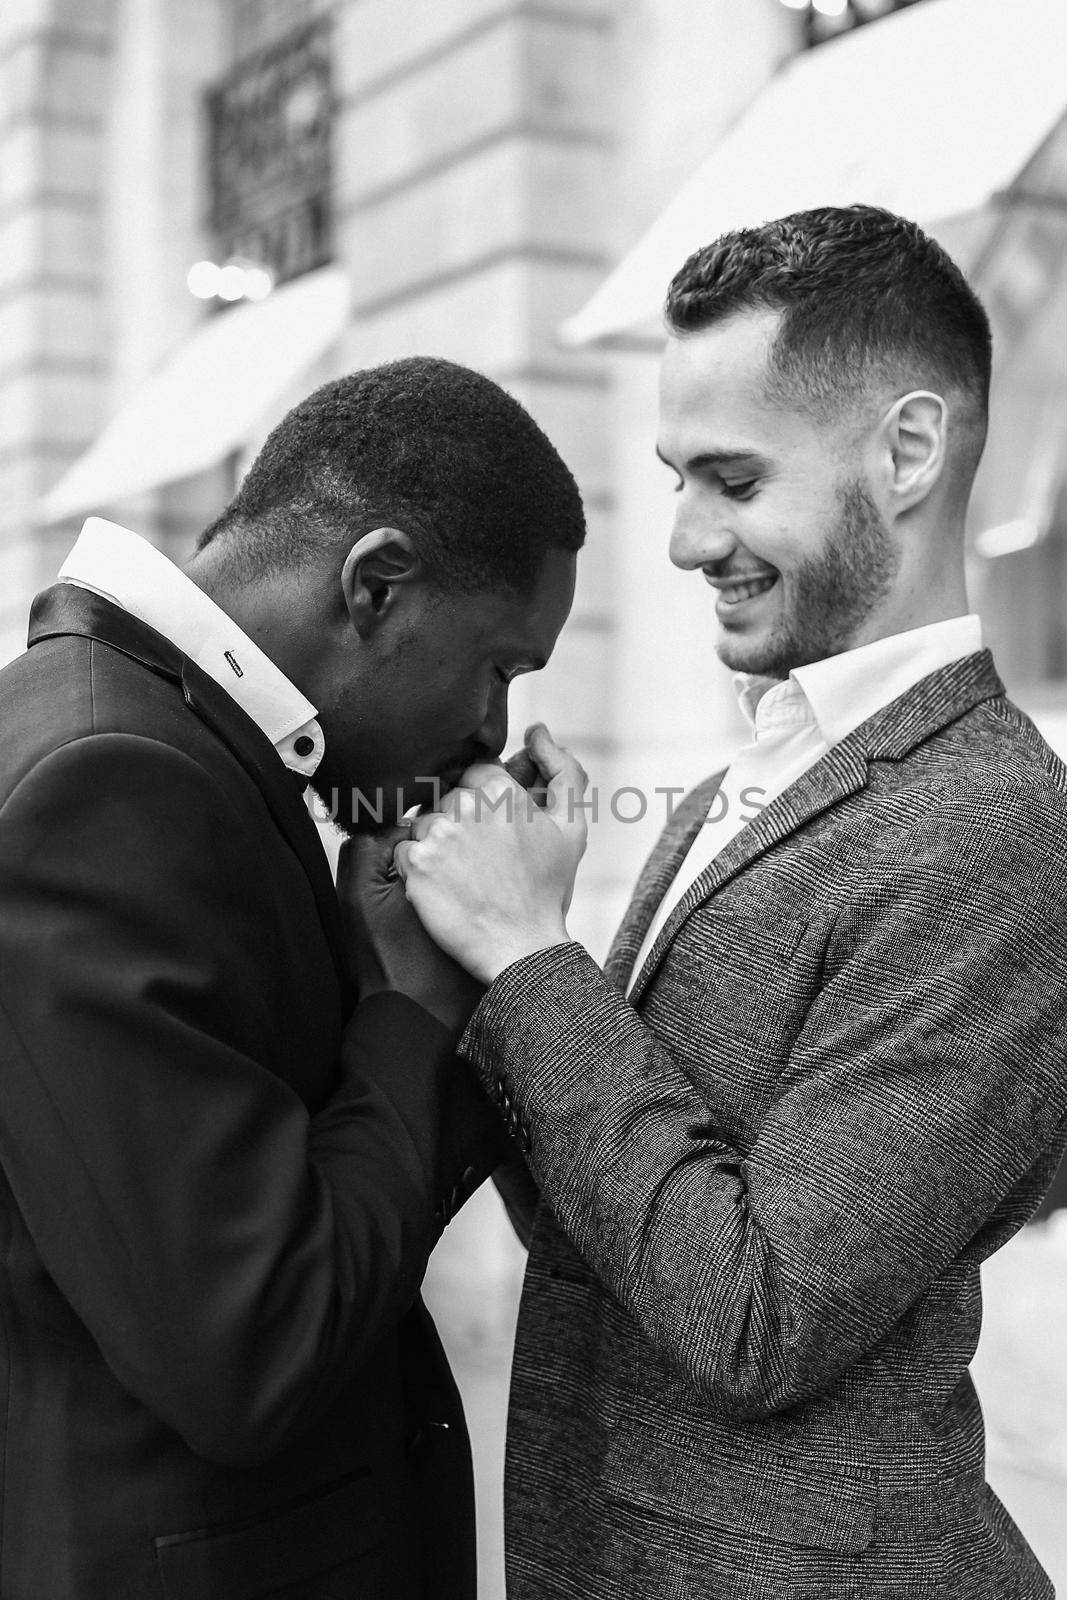 Afro american gay kissing caucasian boy outside, wearing suits. Concept of lgbt and same sex couple. Black and white bw portrait in Paris